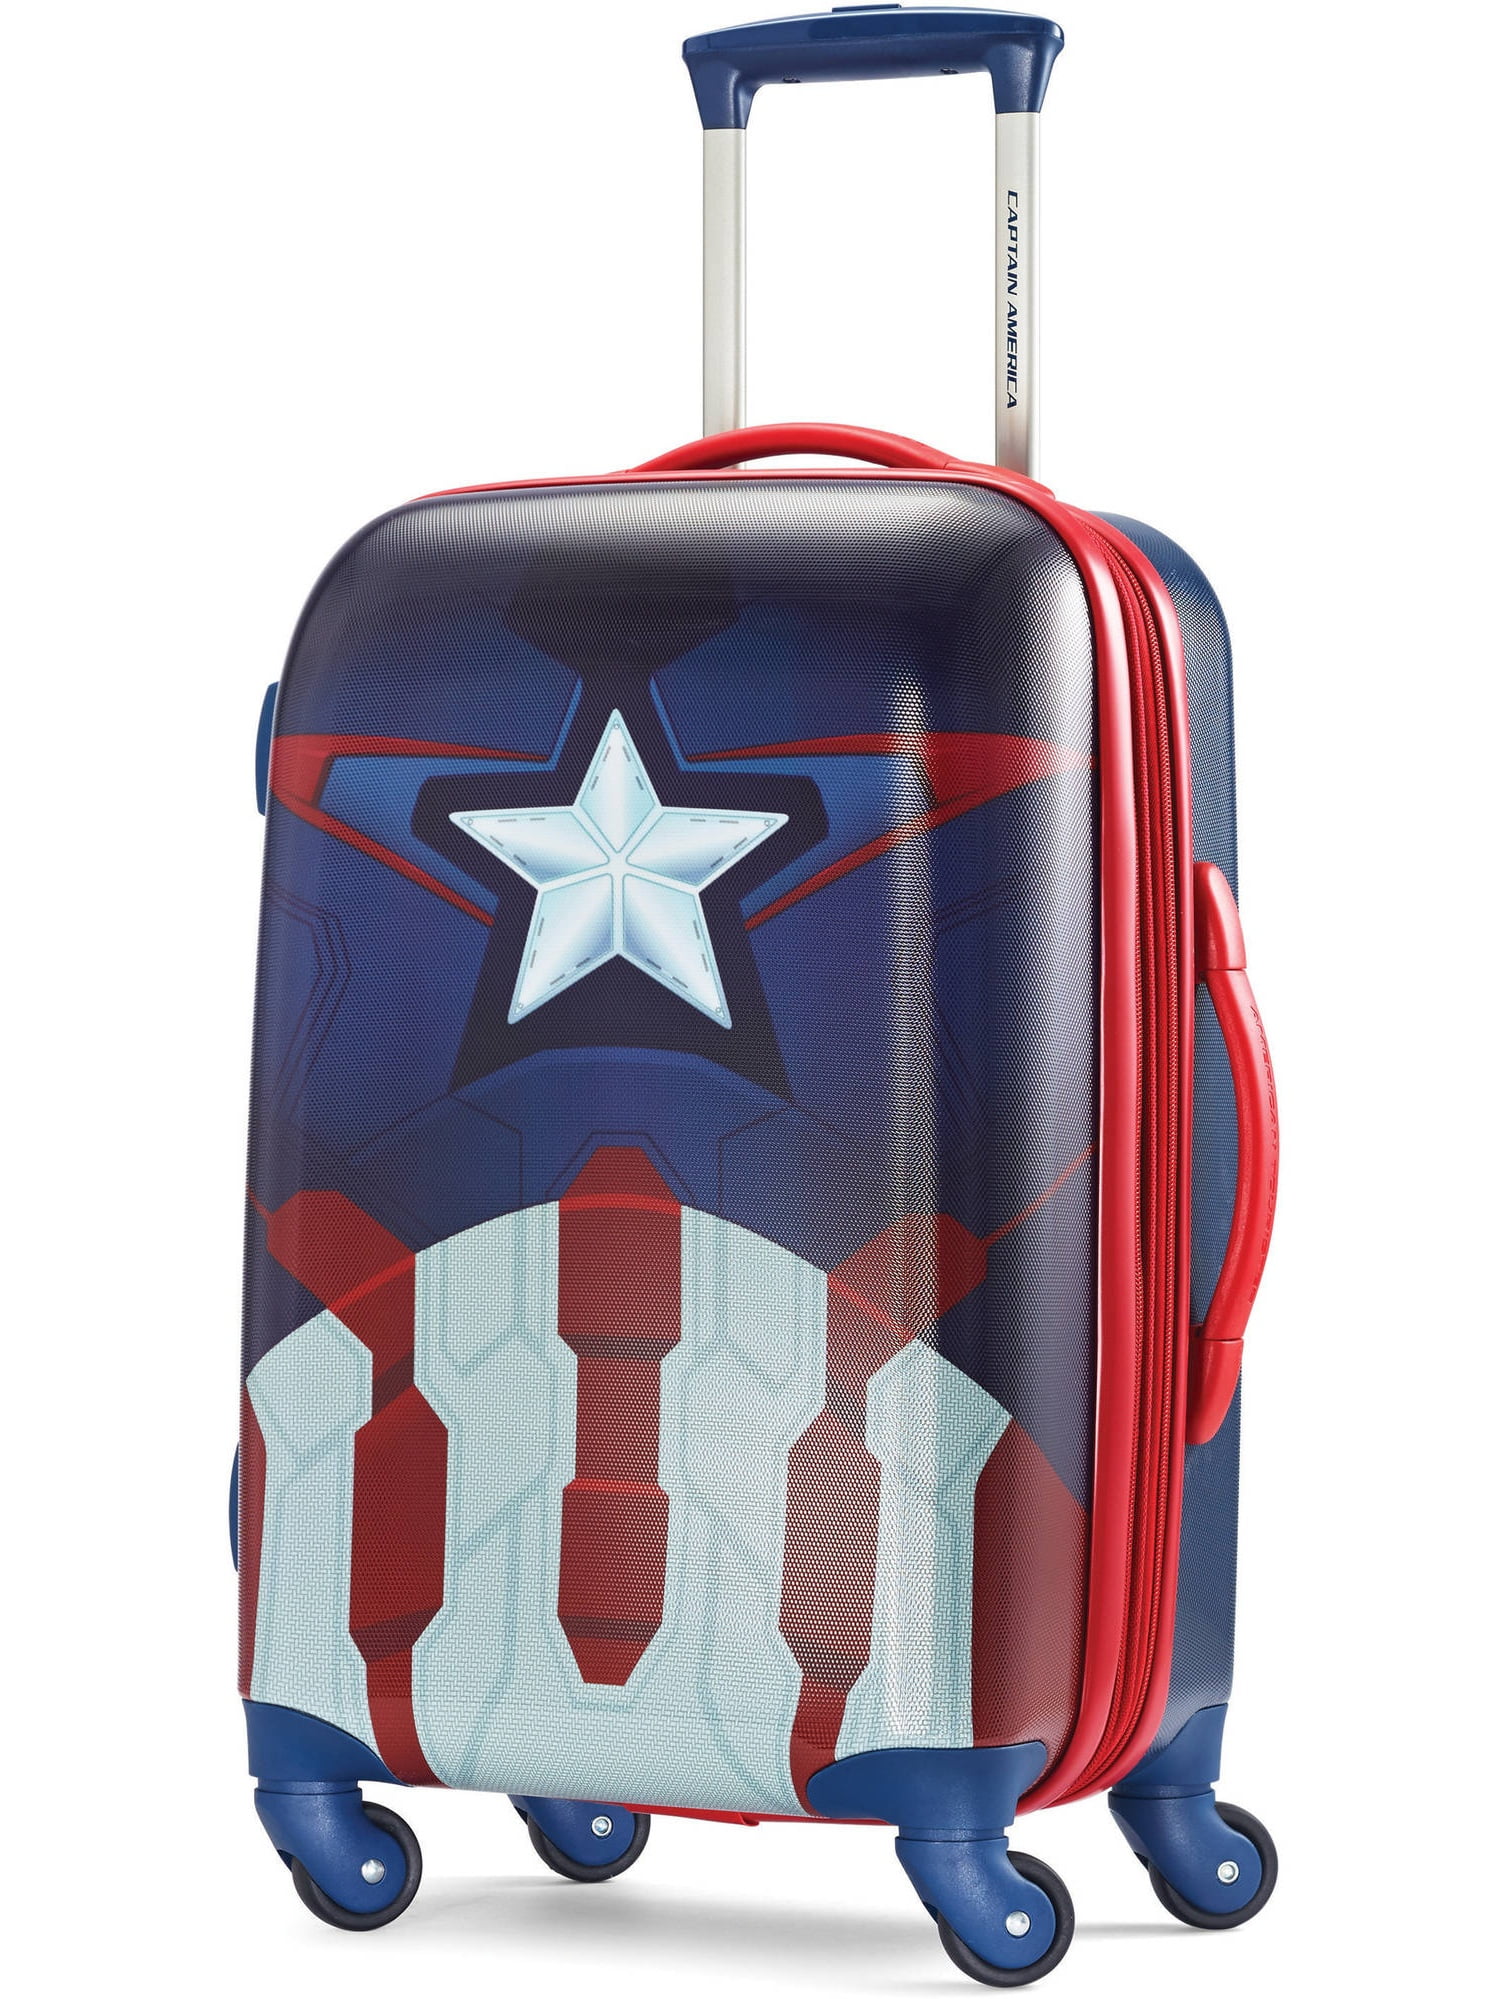 MOREFUN Captain America 18 Carry on Luggage Hard Side Upright Spinner Luggage Rolling